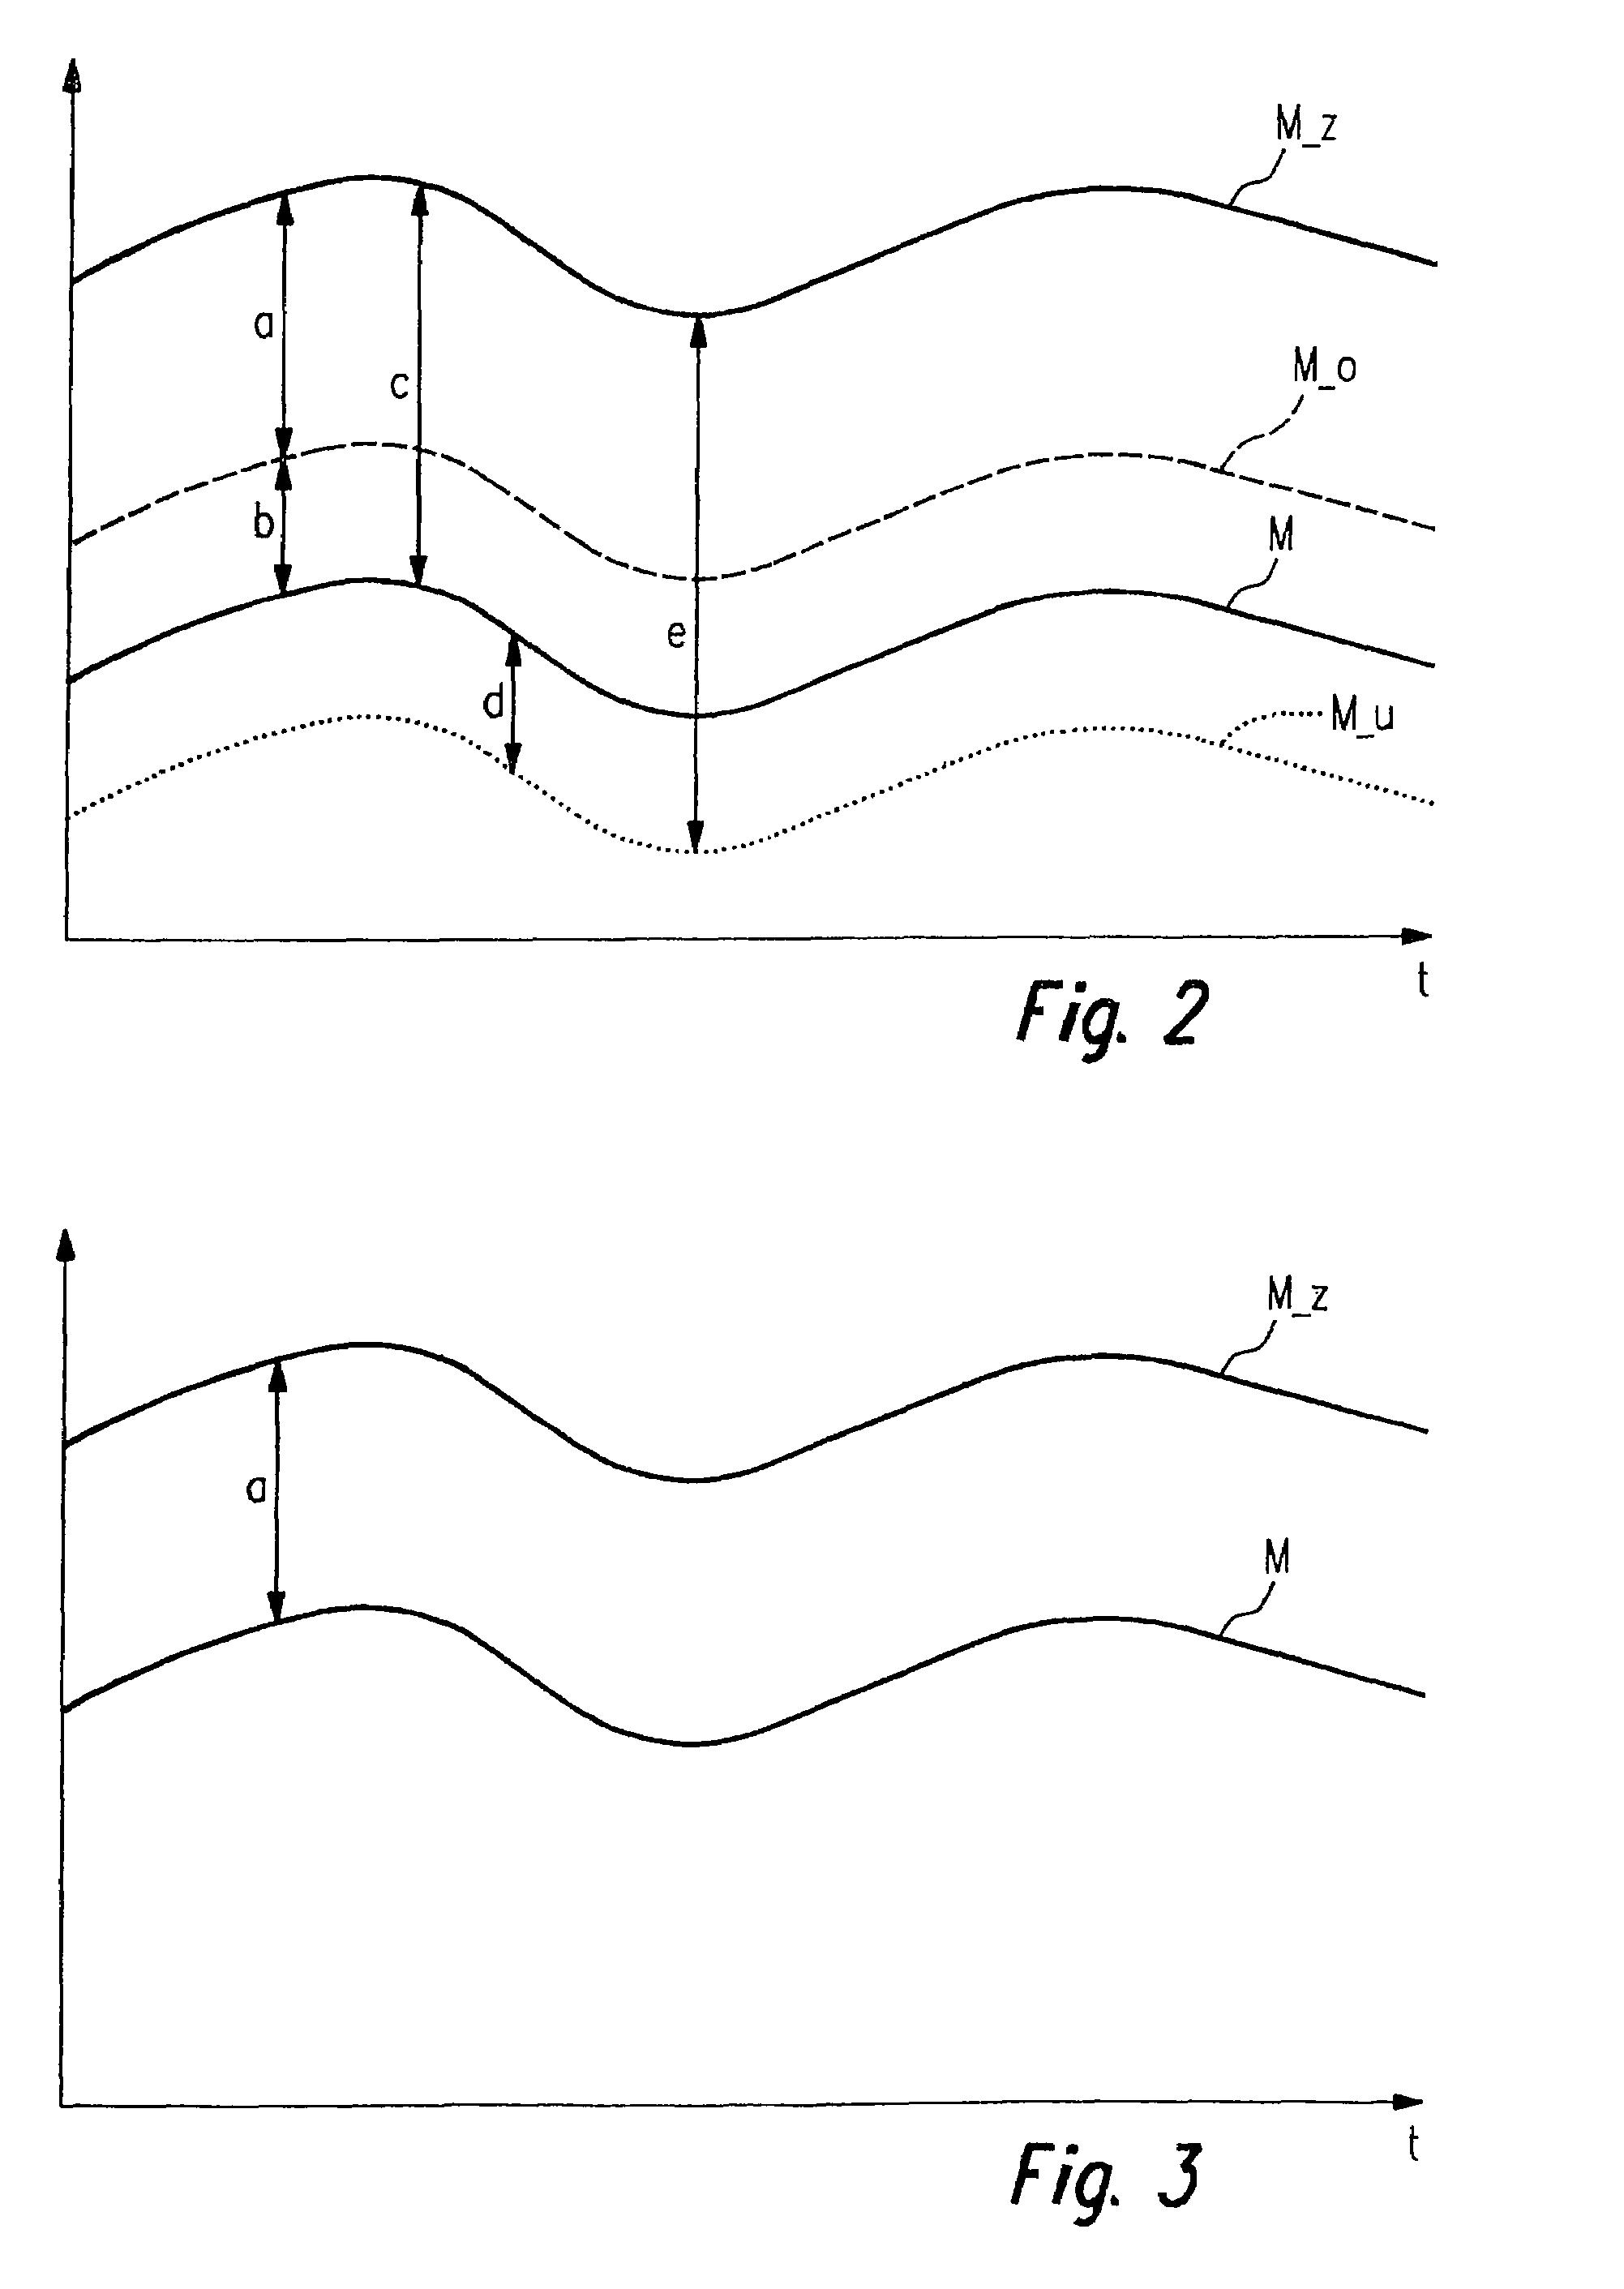 Method for operating an internal combustion engine, taking into consideration the individual properties of the injection devices